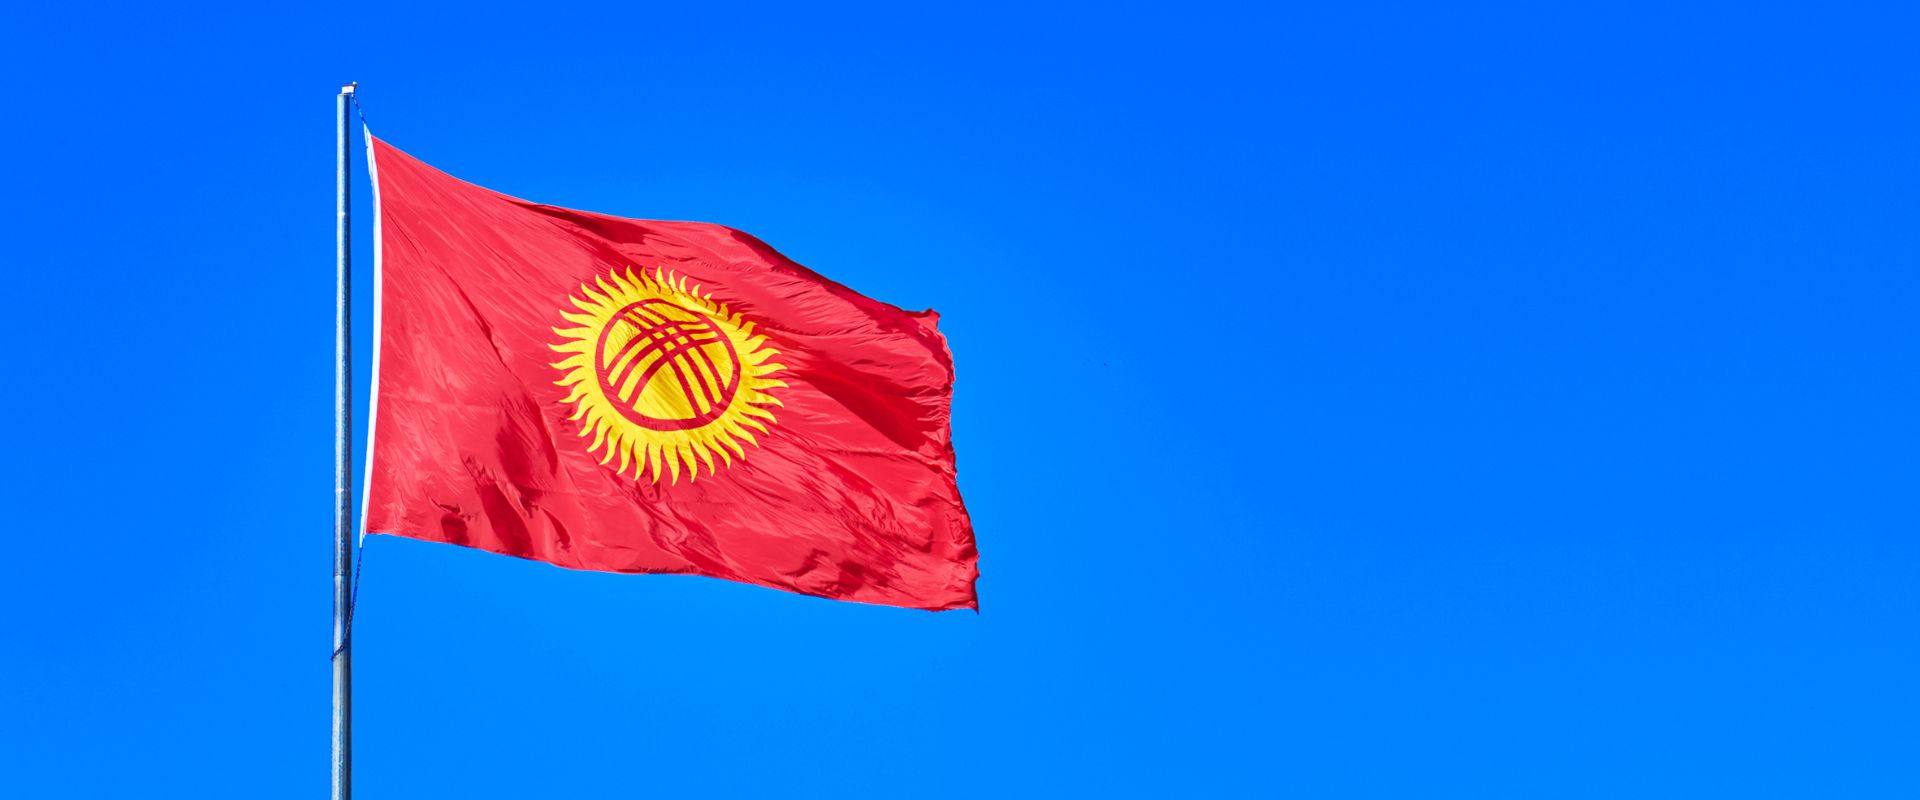 waving flag of Kyrgyzstan on sky background